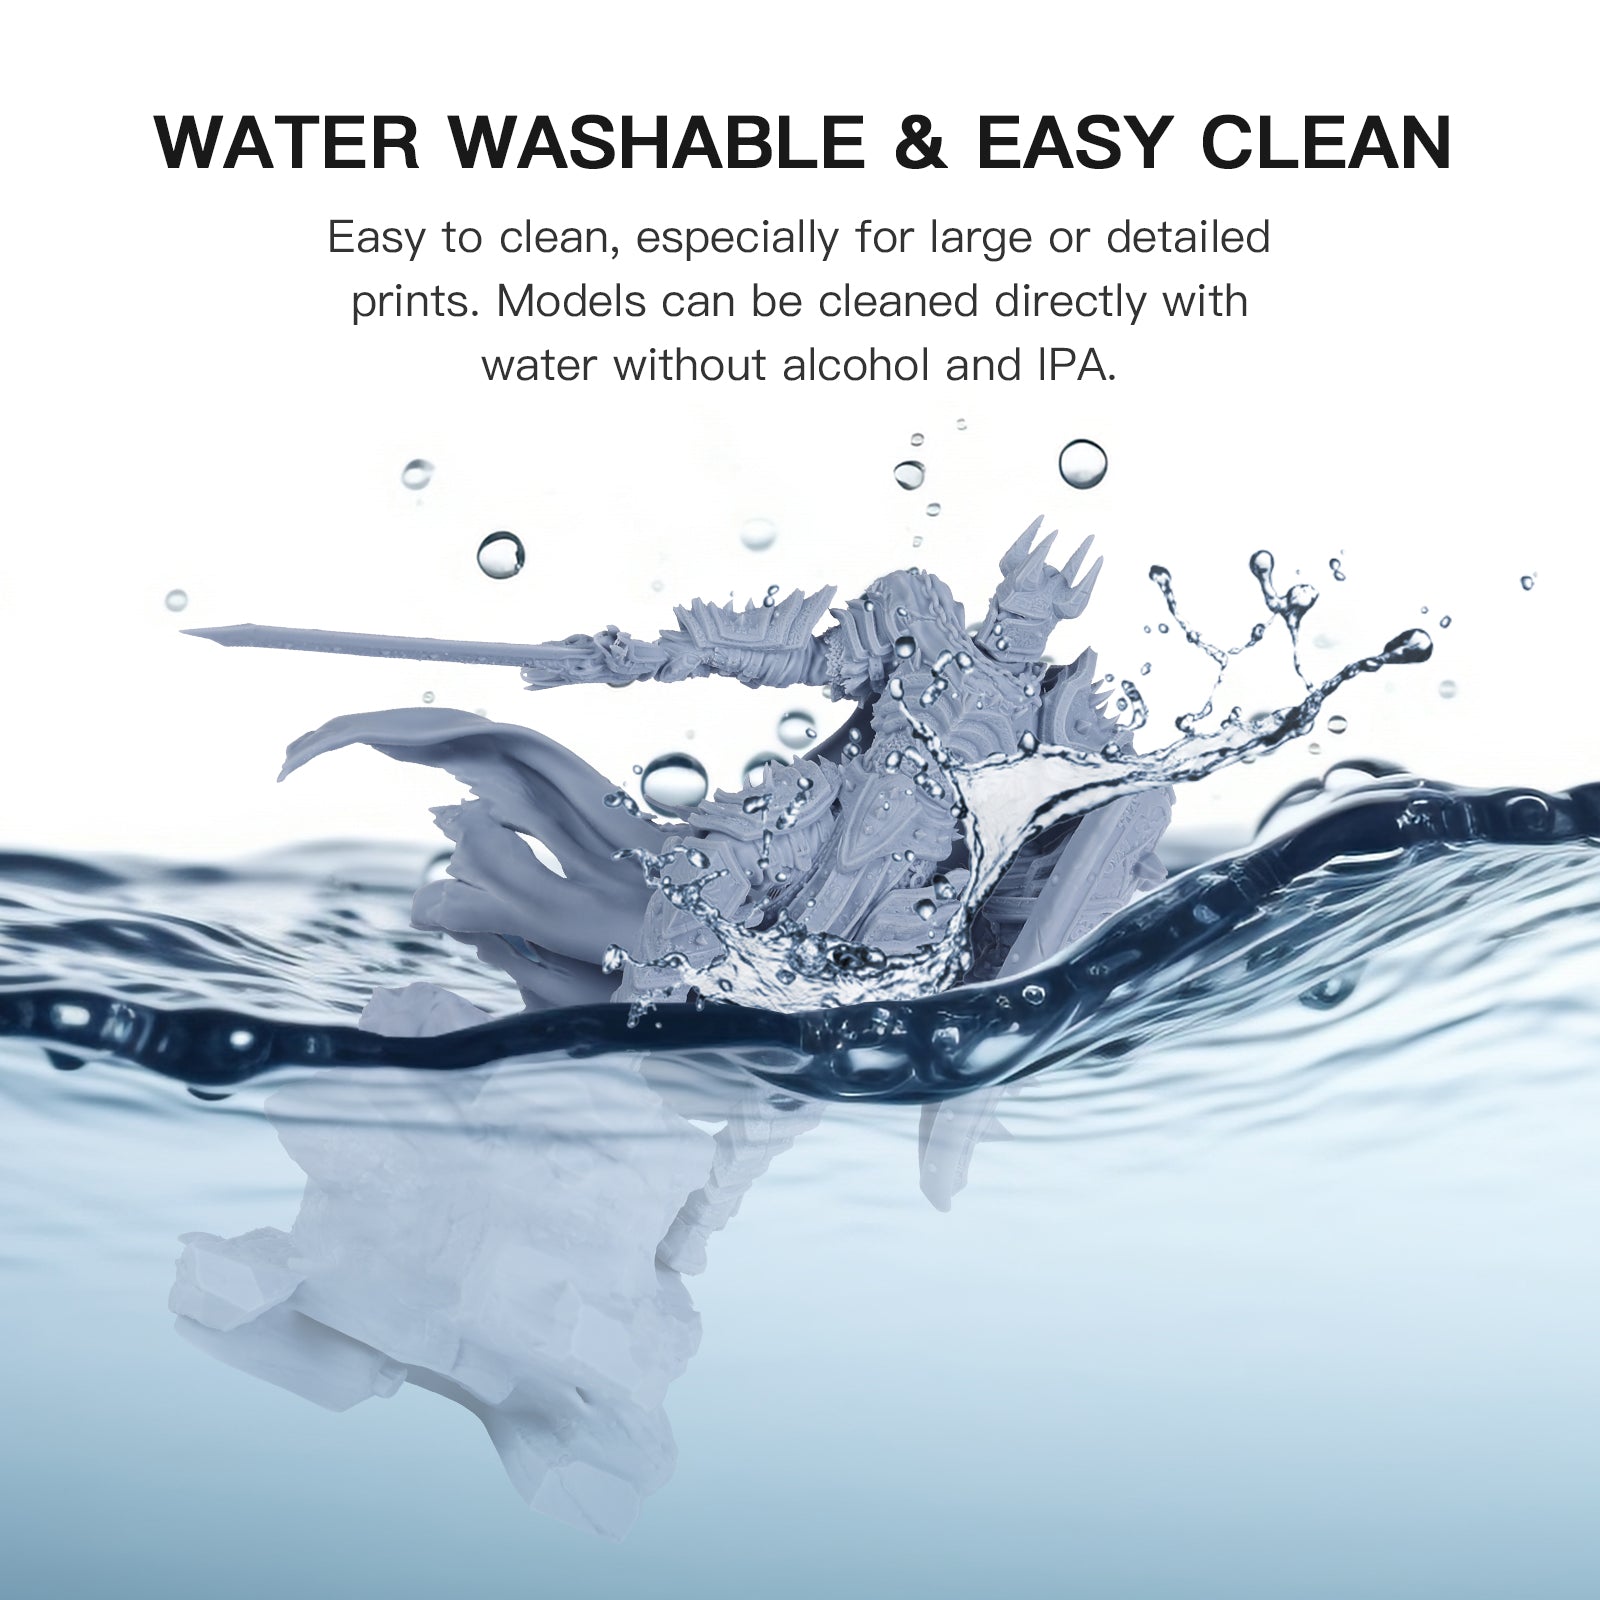 [Clearance Sale] NOVA3D Water Washable  Resin 1000G